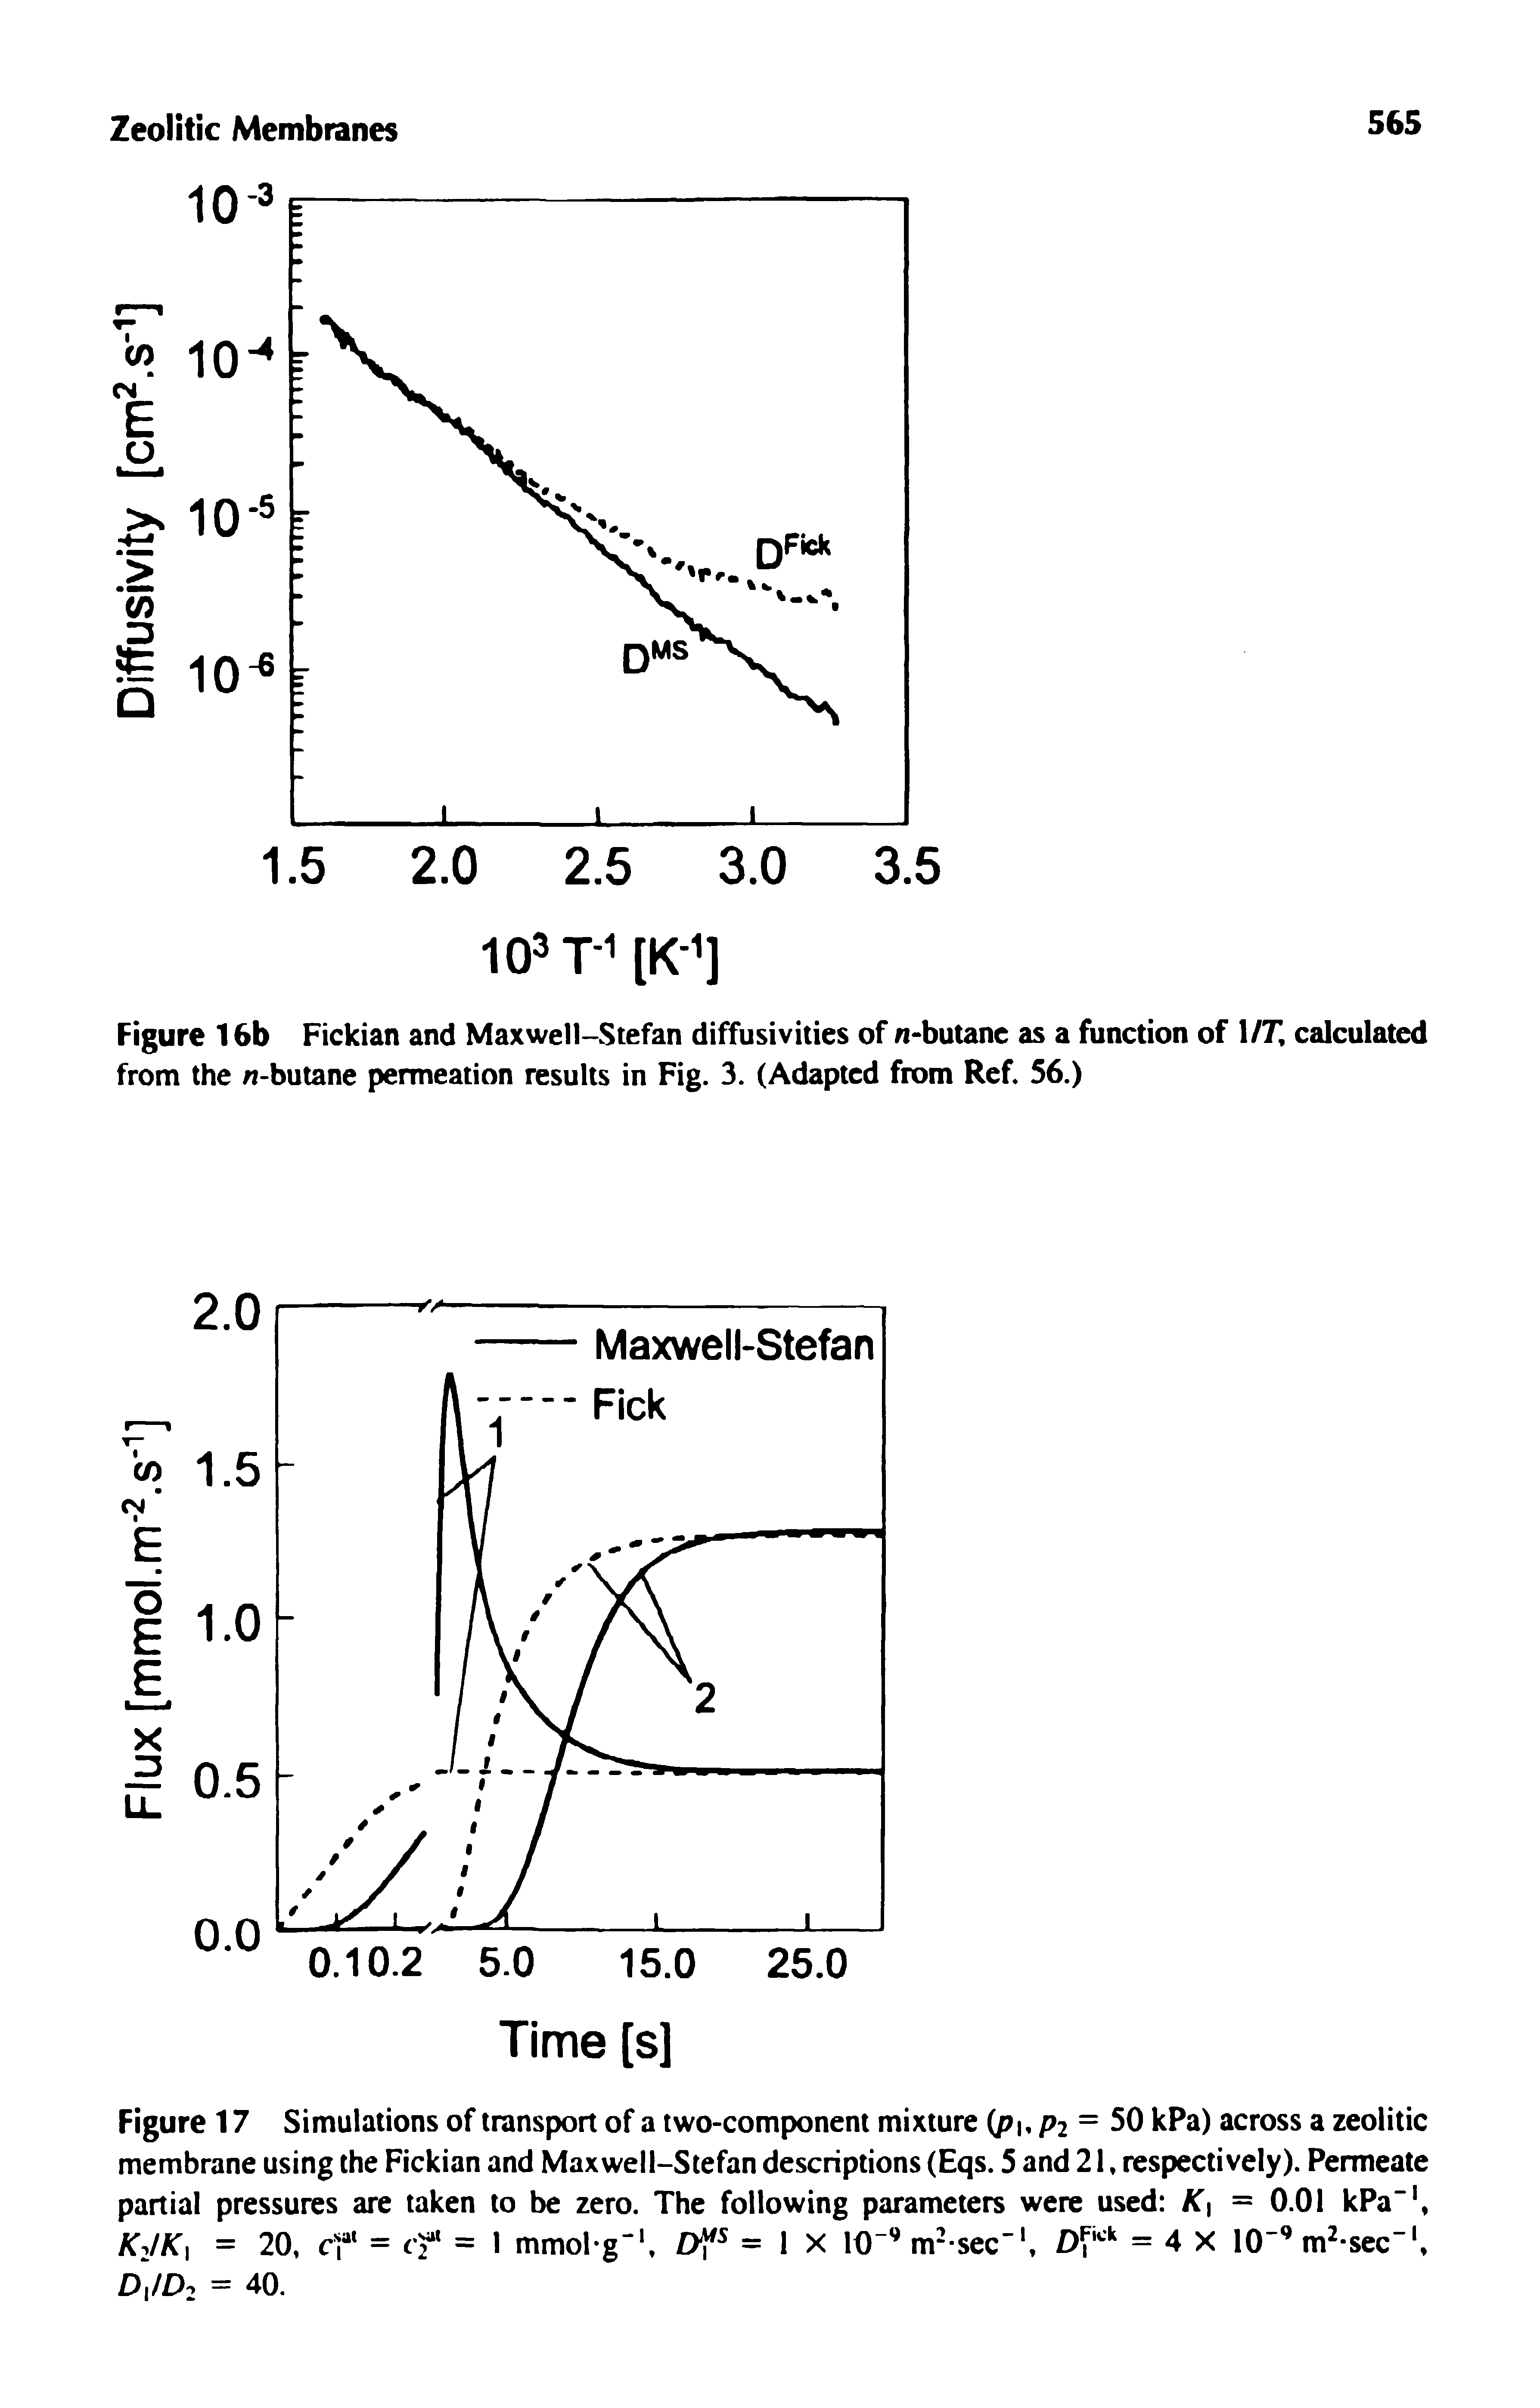 Figure 16b Fickian and Maxwell-Stefan diffusivities of n-butanc as a function of 1/7, calculated from the w-butane permeation results in Fig. 3. (Adapted from Ref. 56.)...